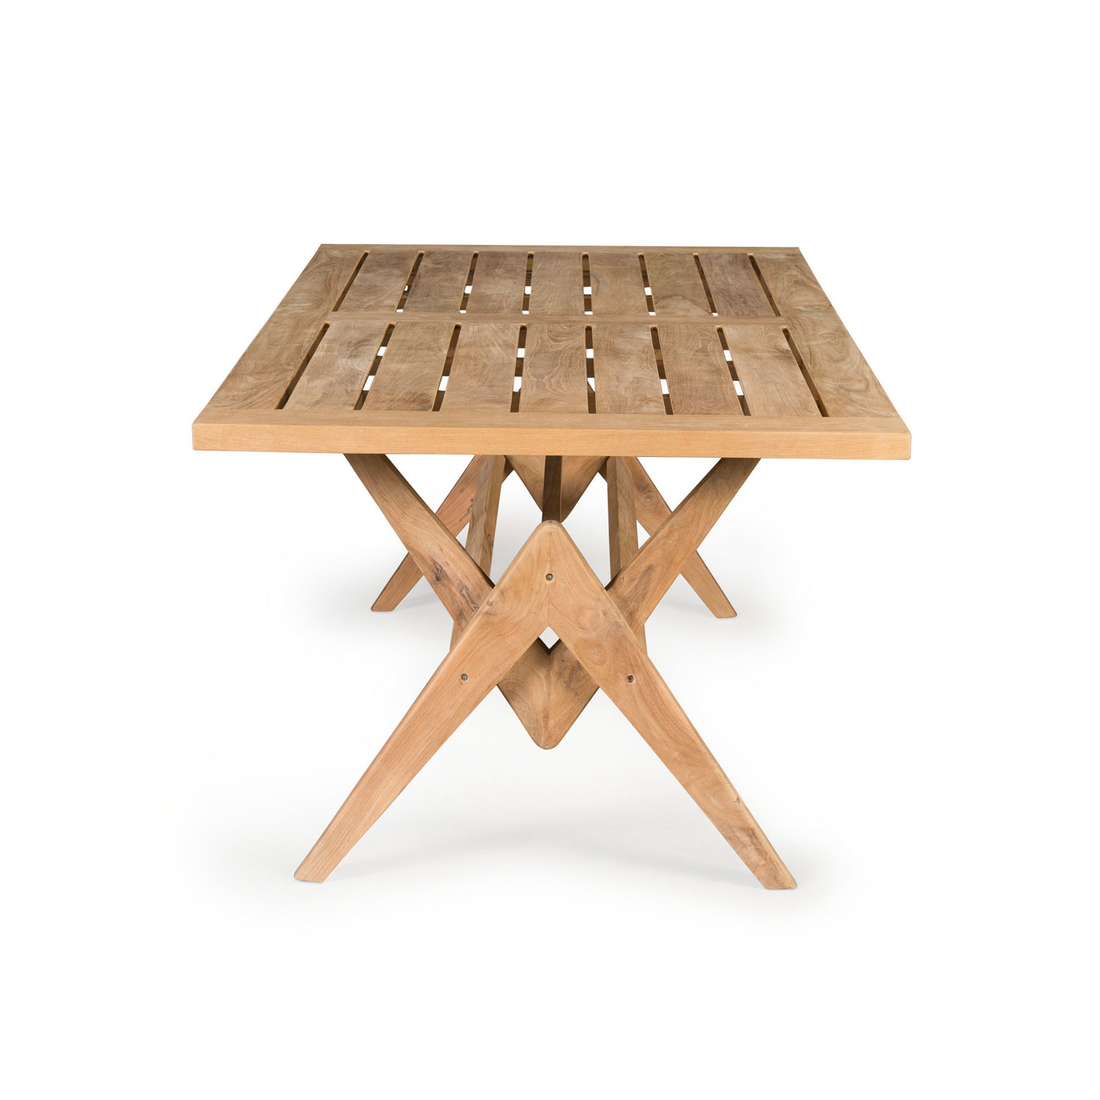 Dining Table W.T.H. 220 - Teak Outdoor